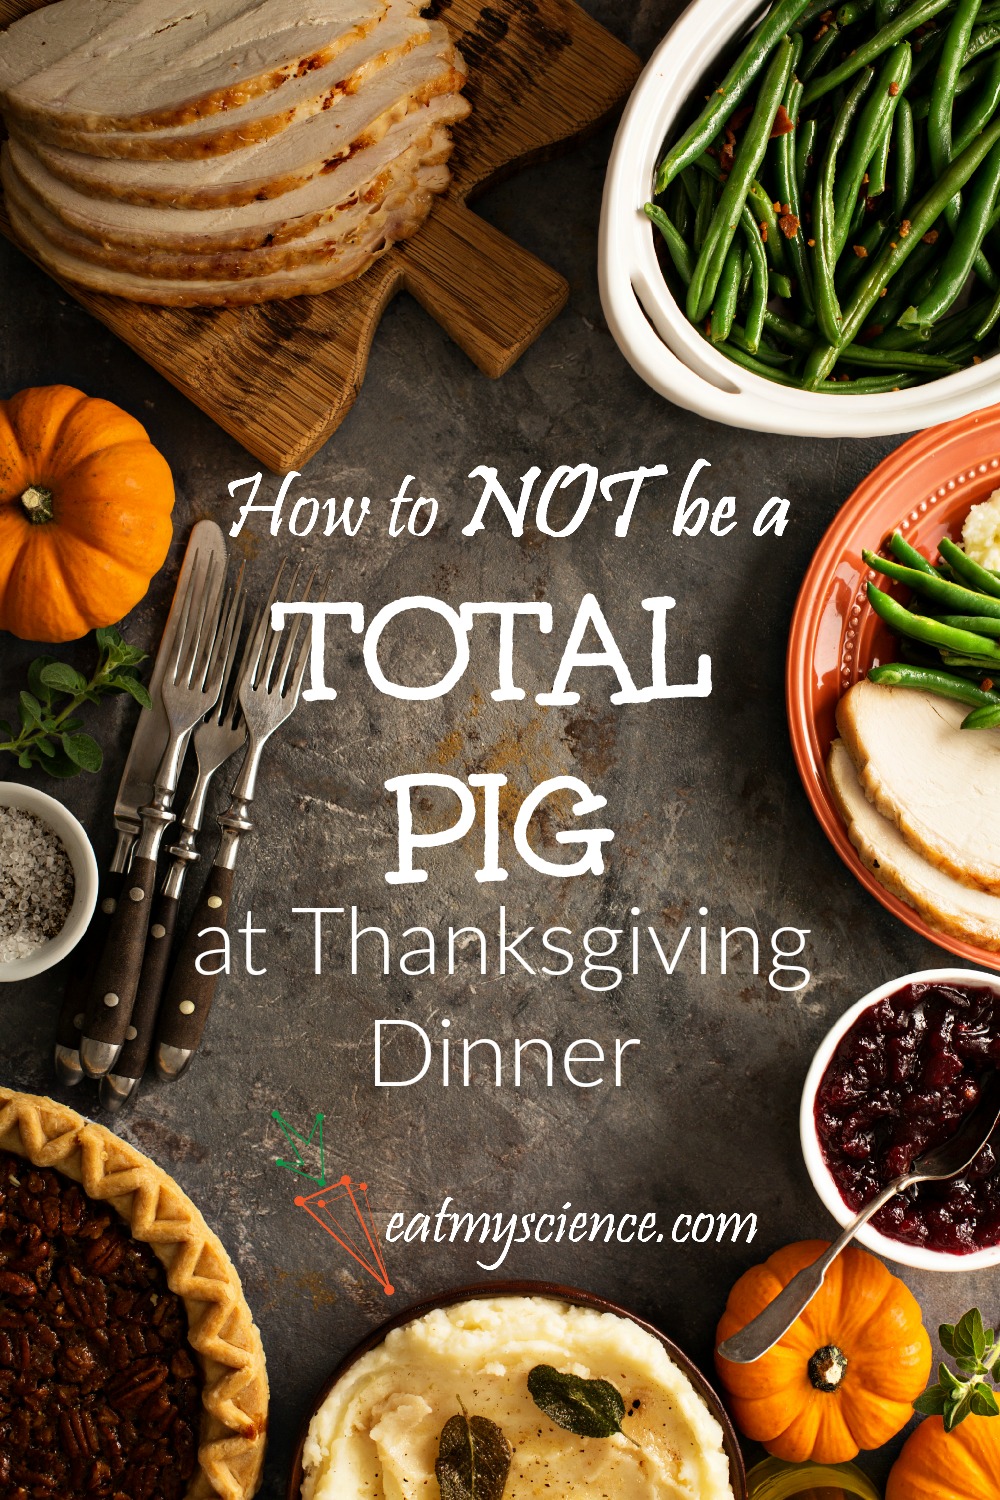 5 tips to stop Thanksgiving Overeating - How to NOT be a total pig at Thanksgiving Dinner